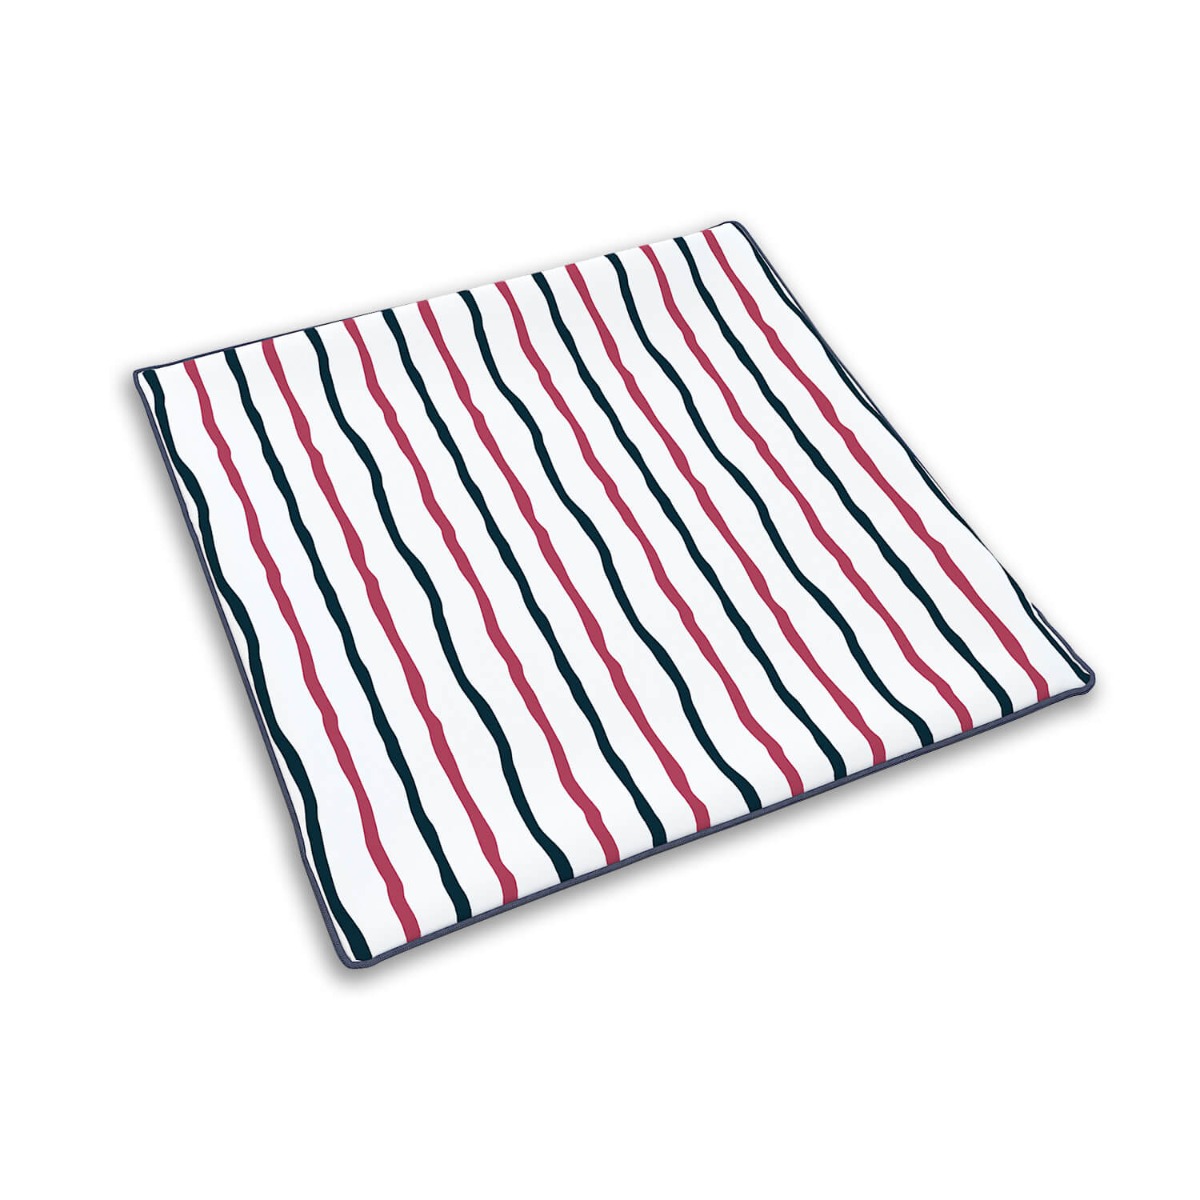 Stripes Pillow Cover>